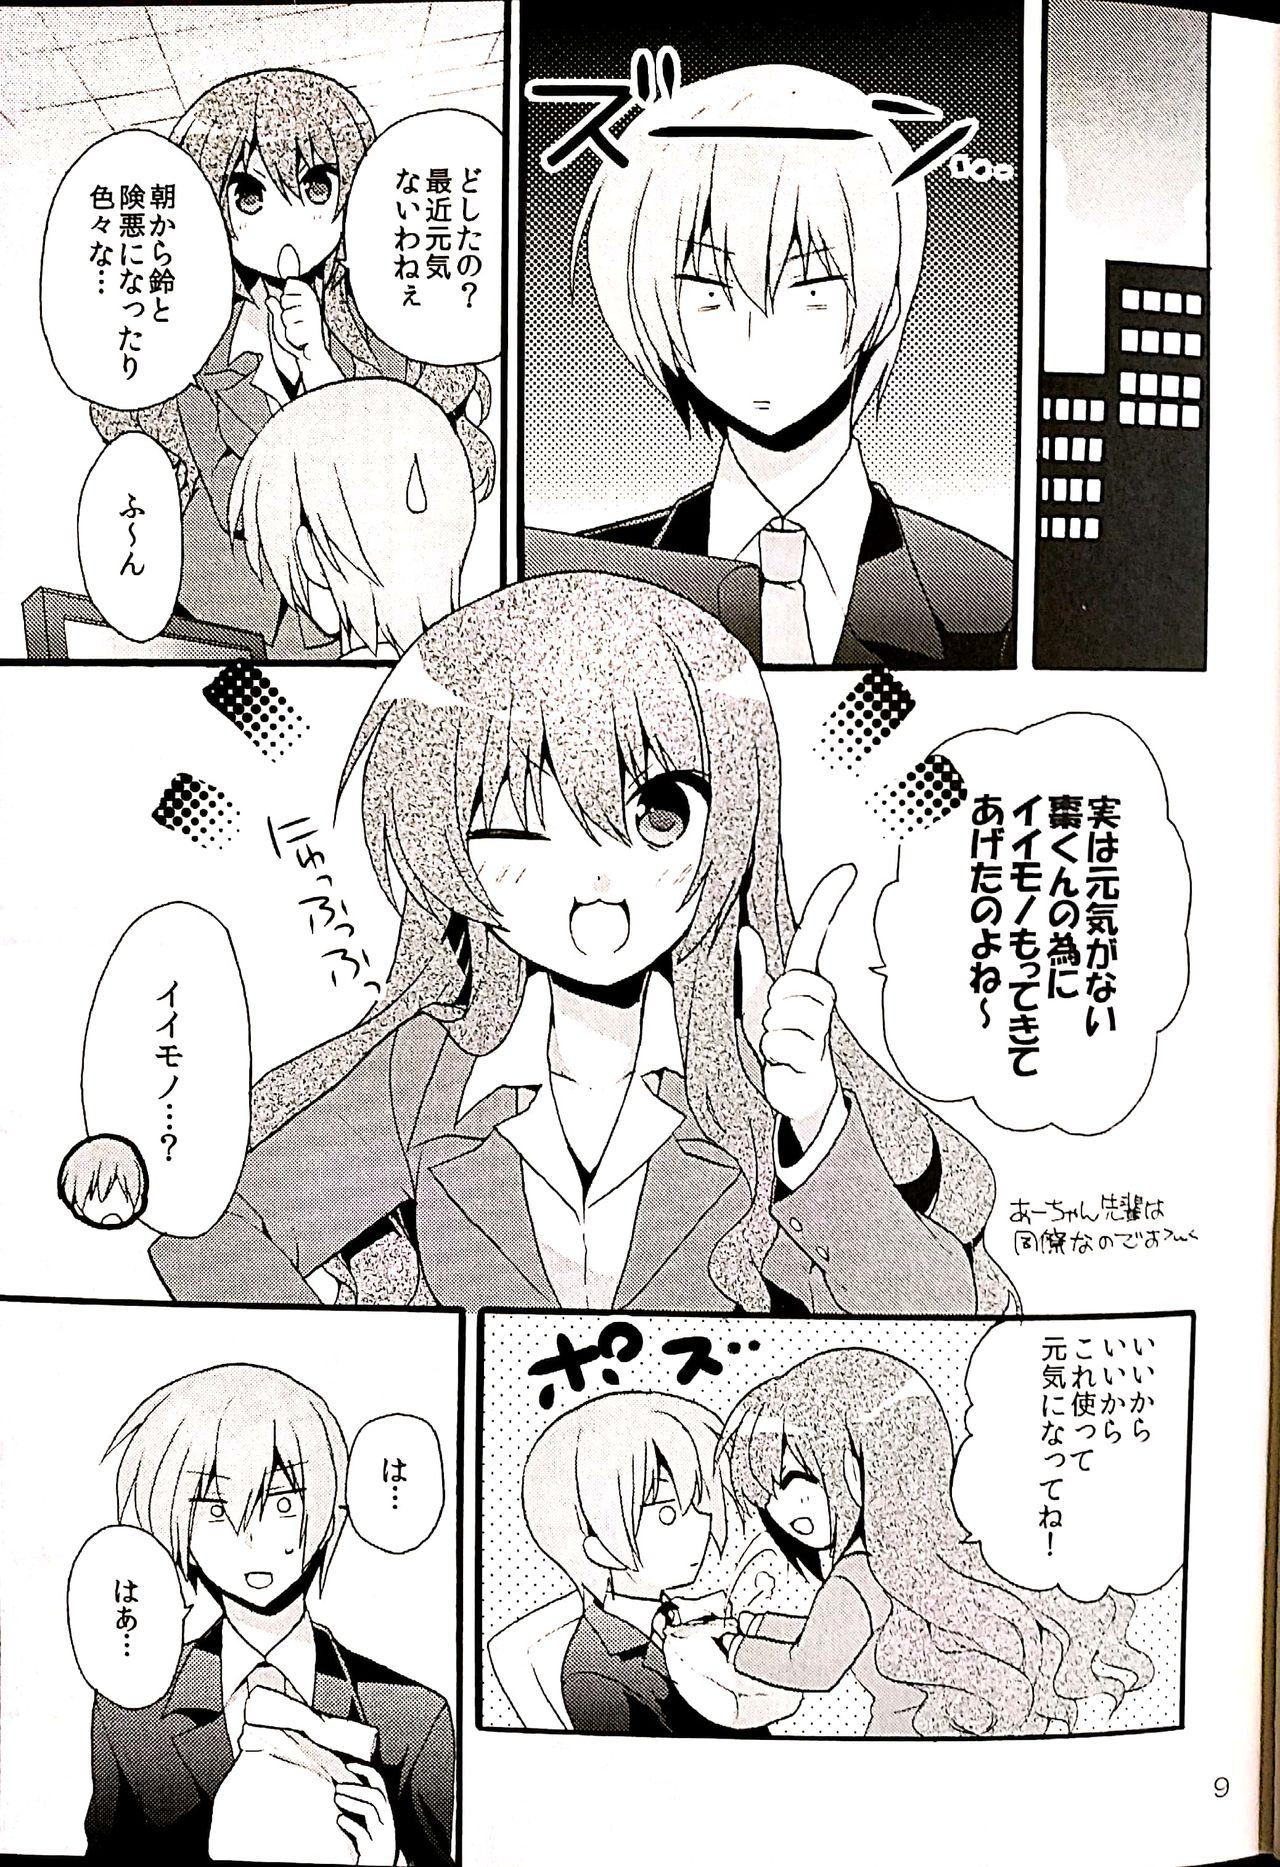 Best Blowjobs Sister Complex! - Little busters Puto - Page 6